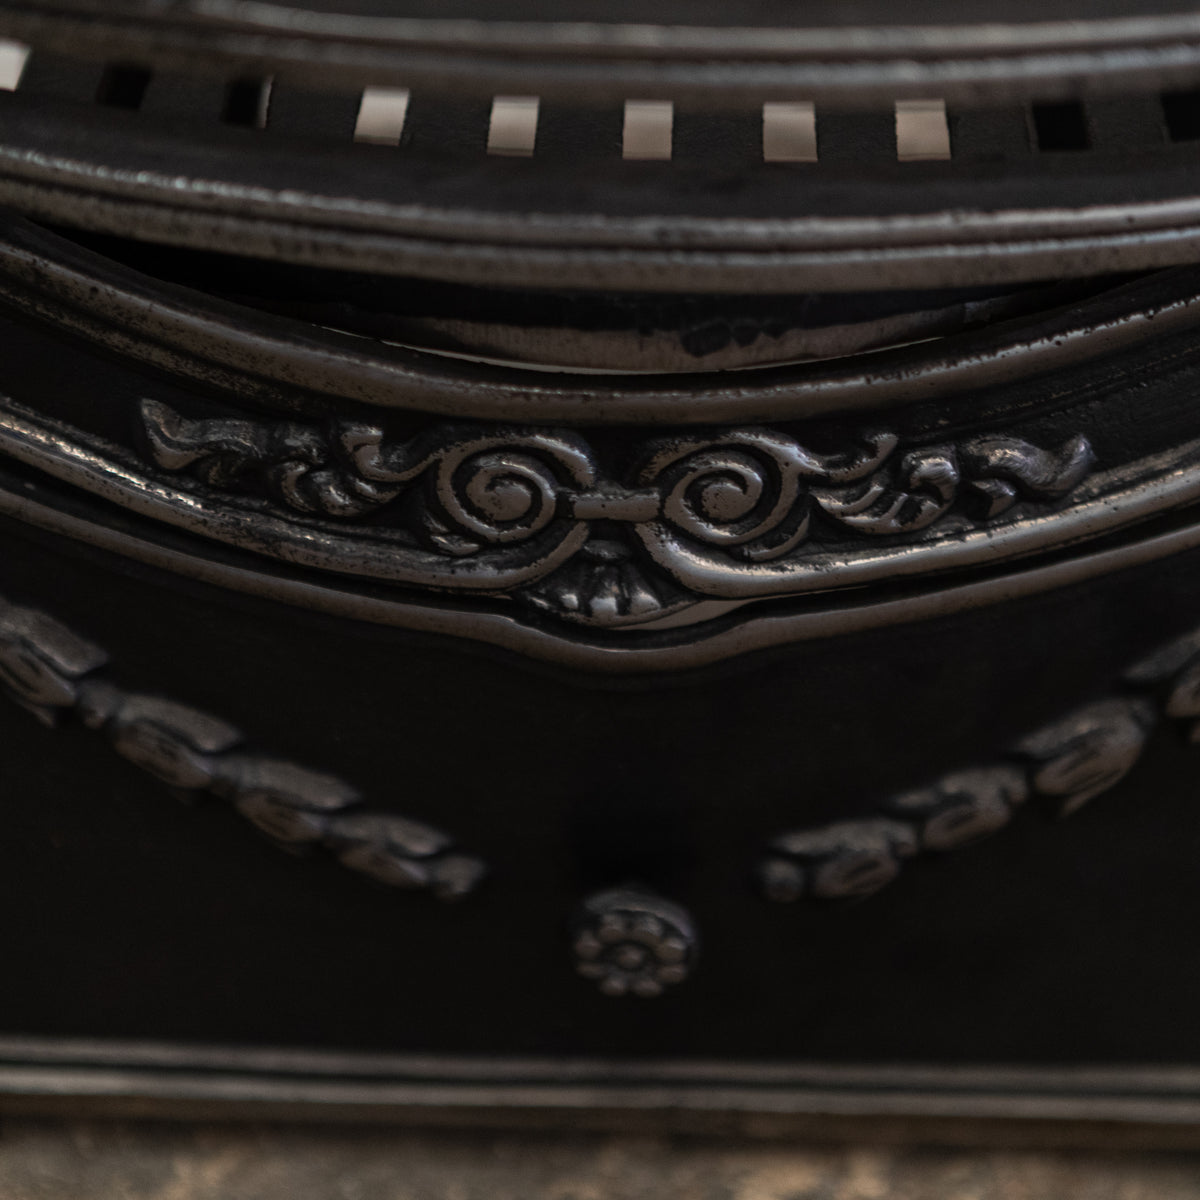 Reclaimed Victorian Style Cast Iron Fire Basket with Finials | The Architectural Forum